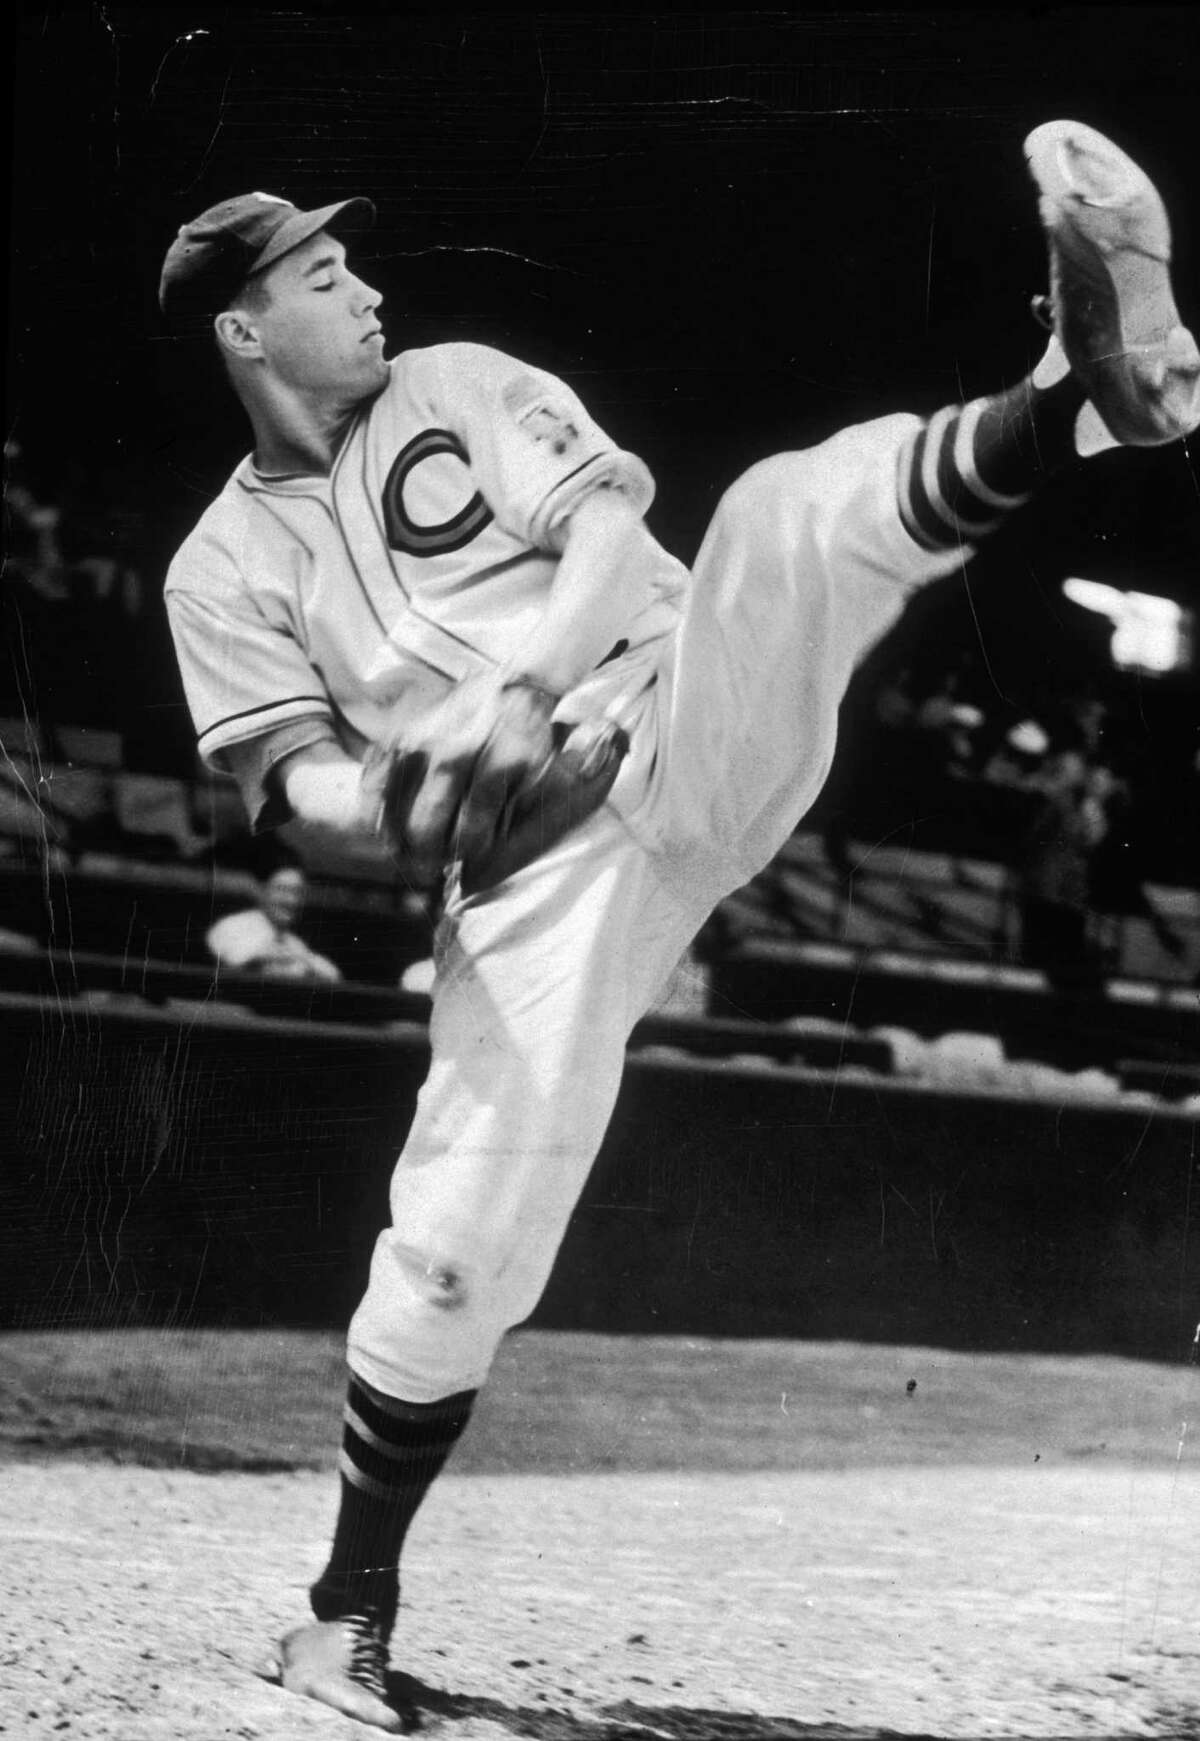 circa 1940: Full-length image of baseball pitcher Bob Feller of the Cleveland Indians winding up for a pitch during practice. (Photo by New York Times Co./Getty Images)